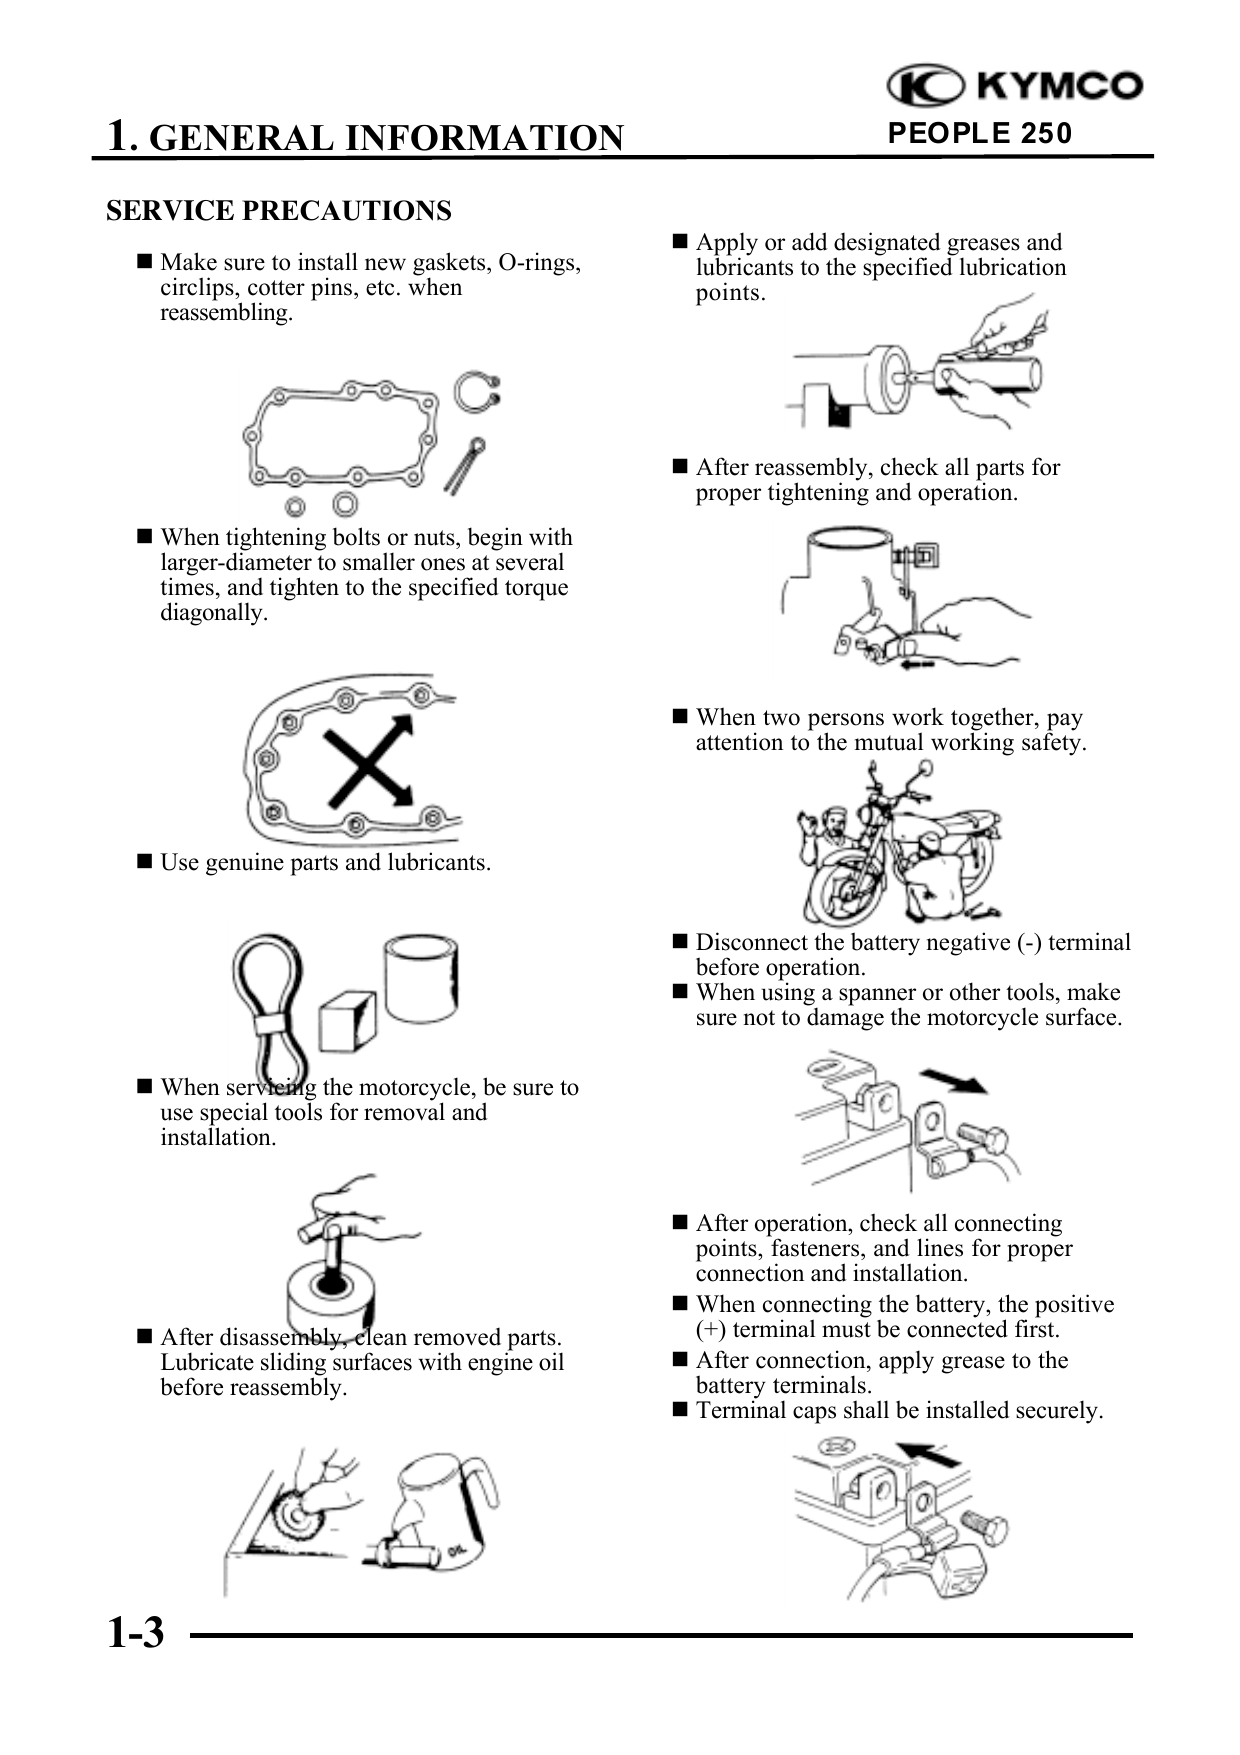 1999-2005 Kymco People 250 scooter repair manual Preview image 4